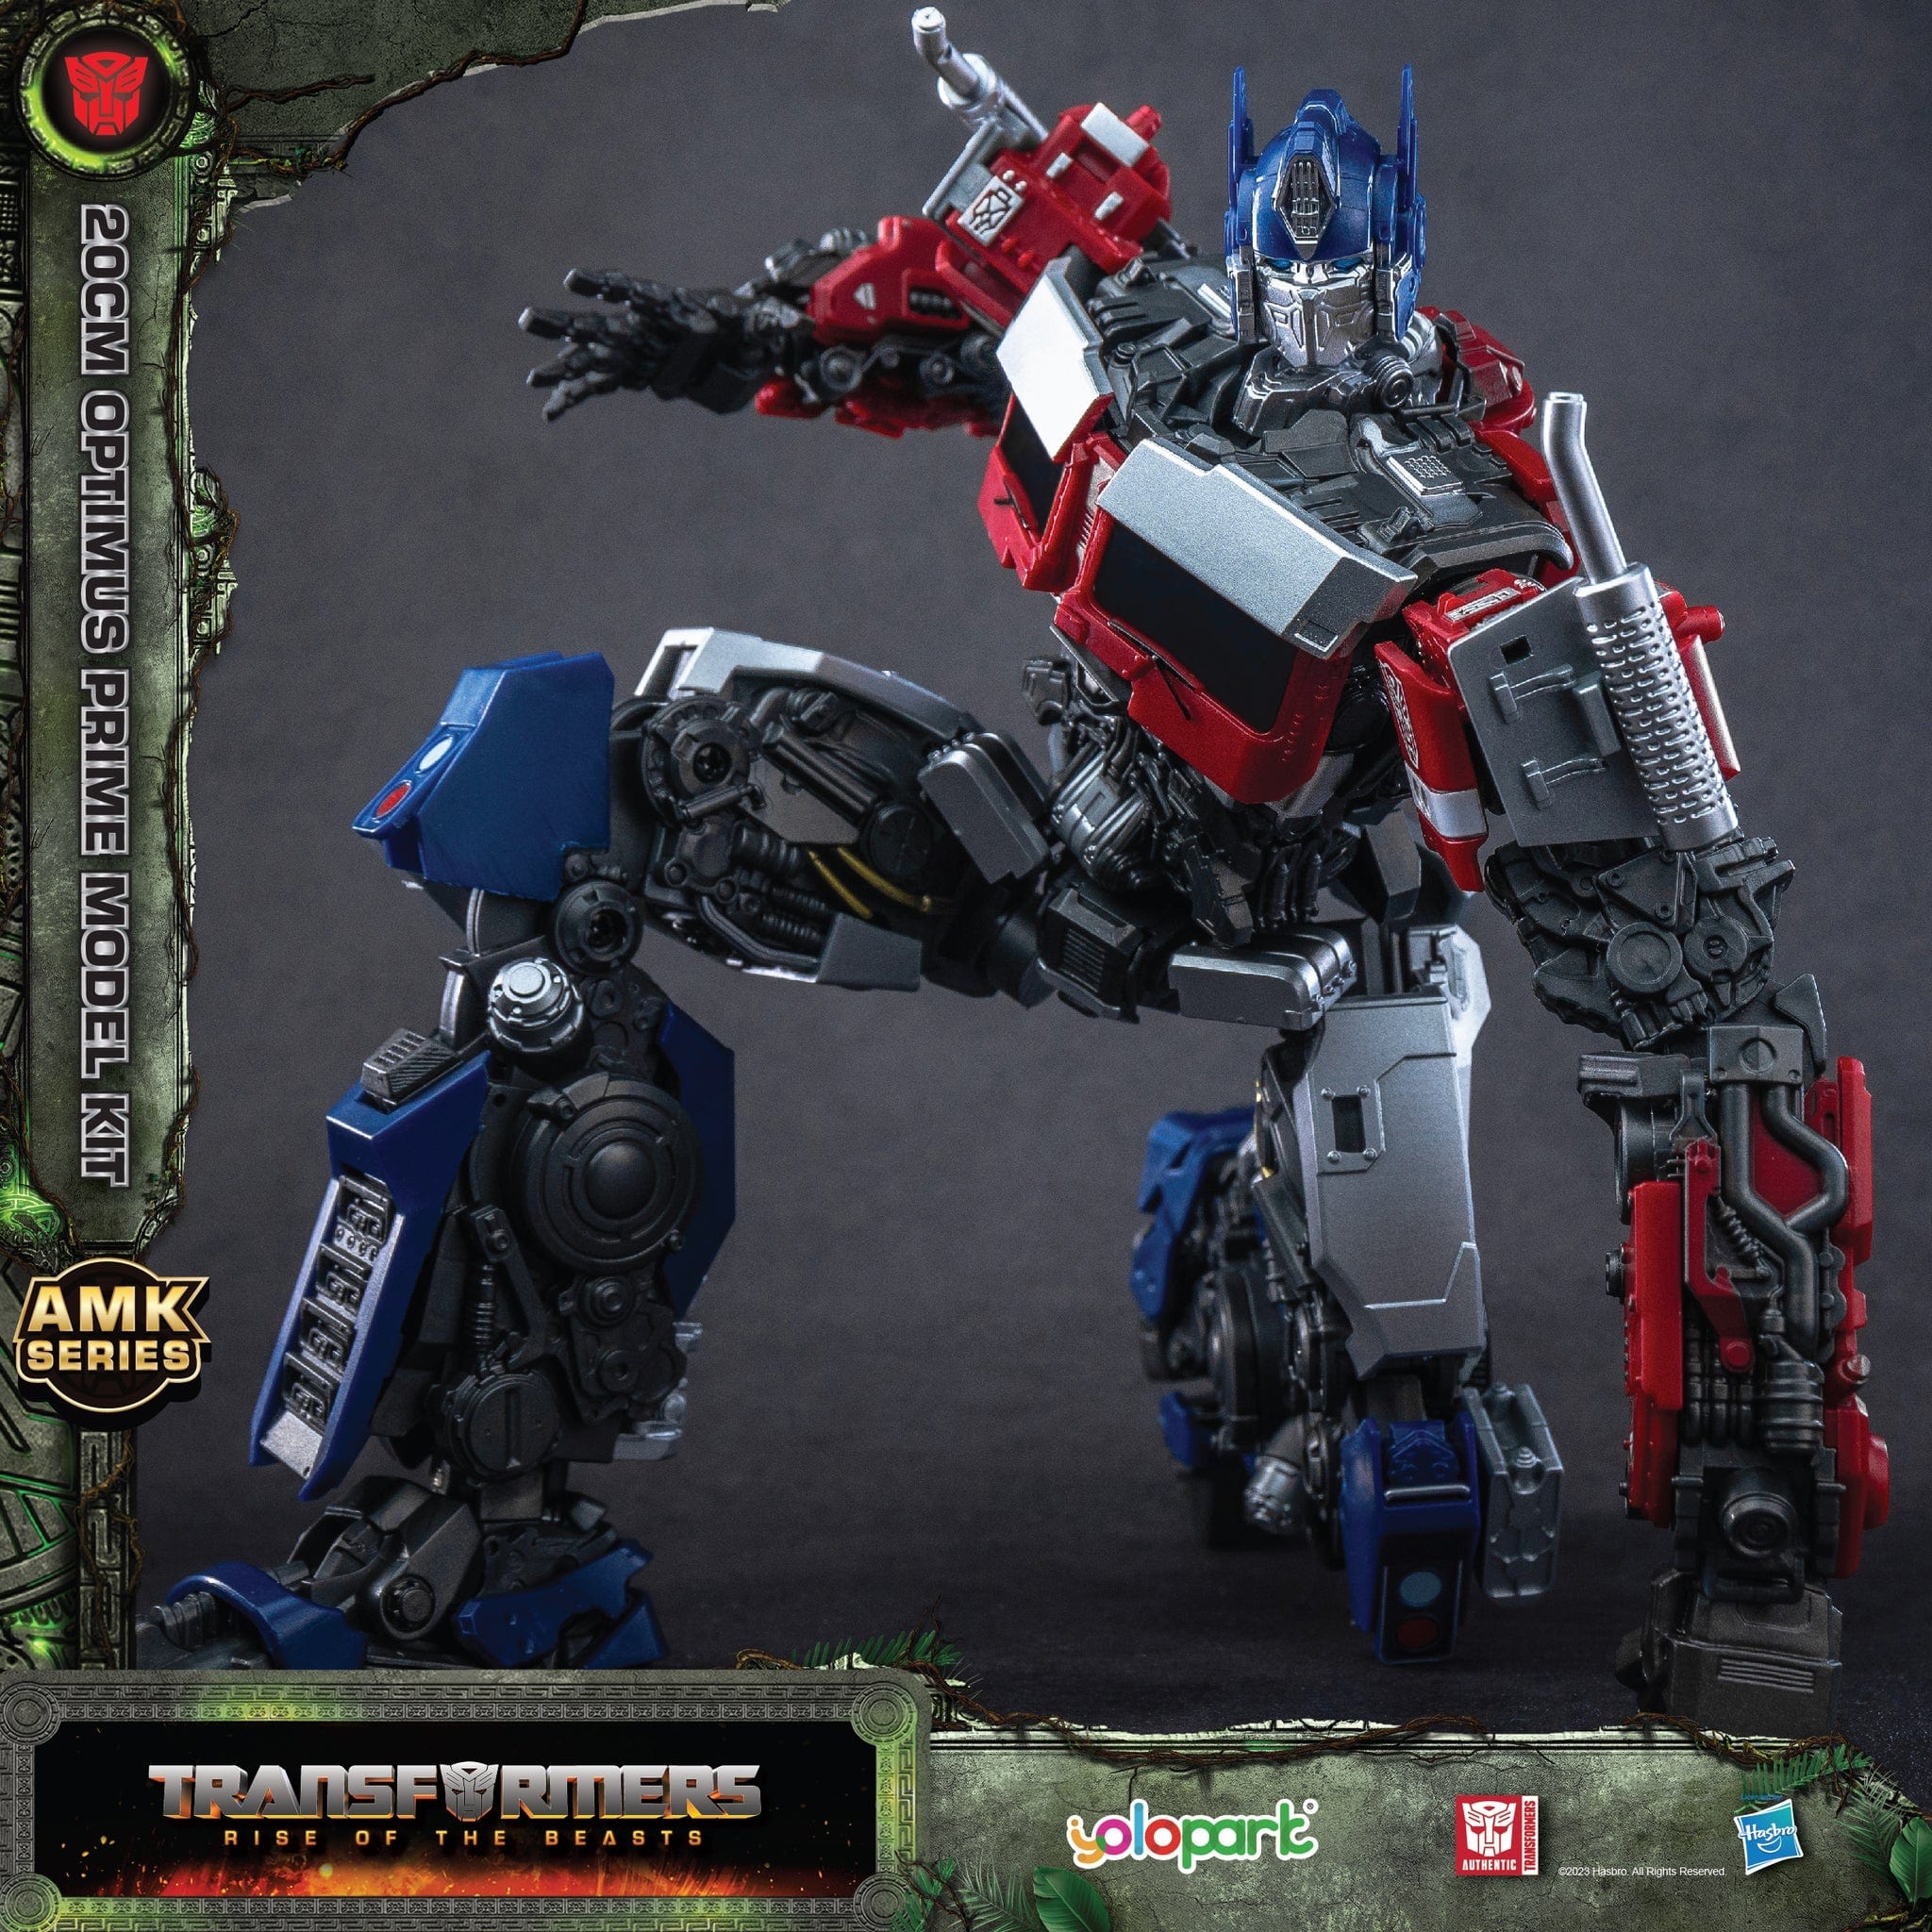 Transformers Rise of the Beasts Optimus Prime Model Kit - Saltire Games